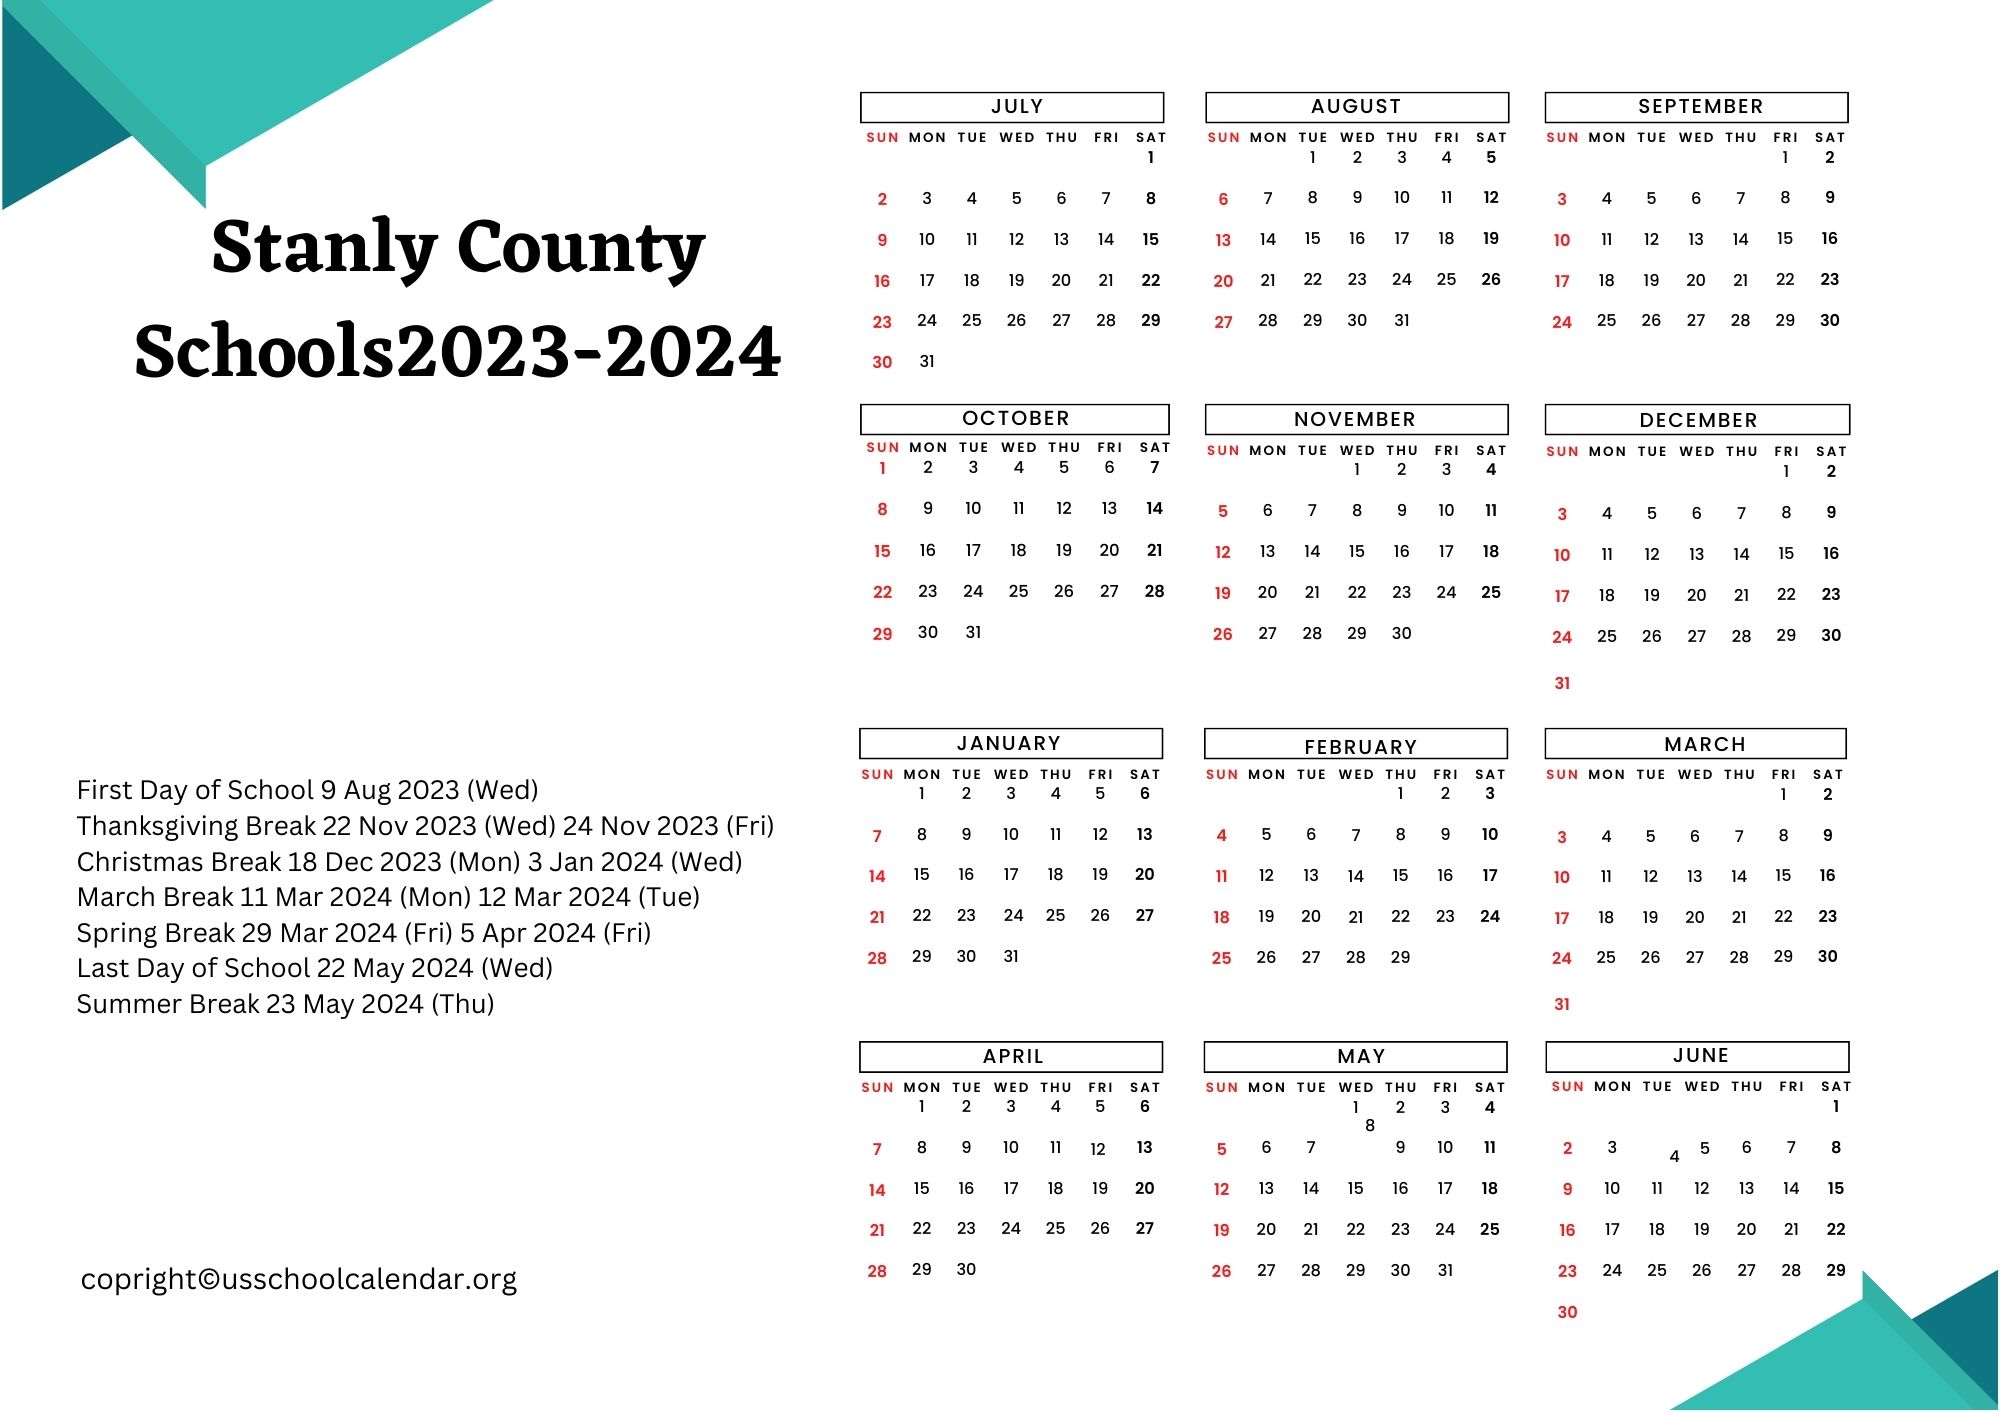 stanly-county-schools-calendar-with-holidays-2023-2024